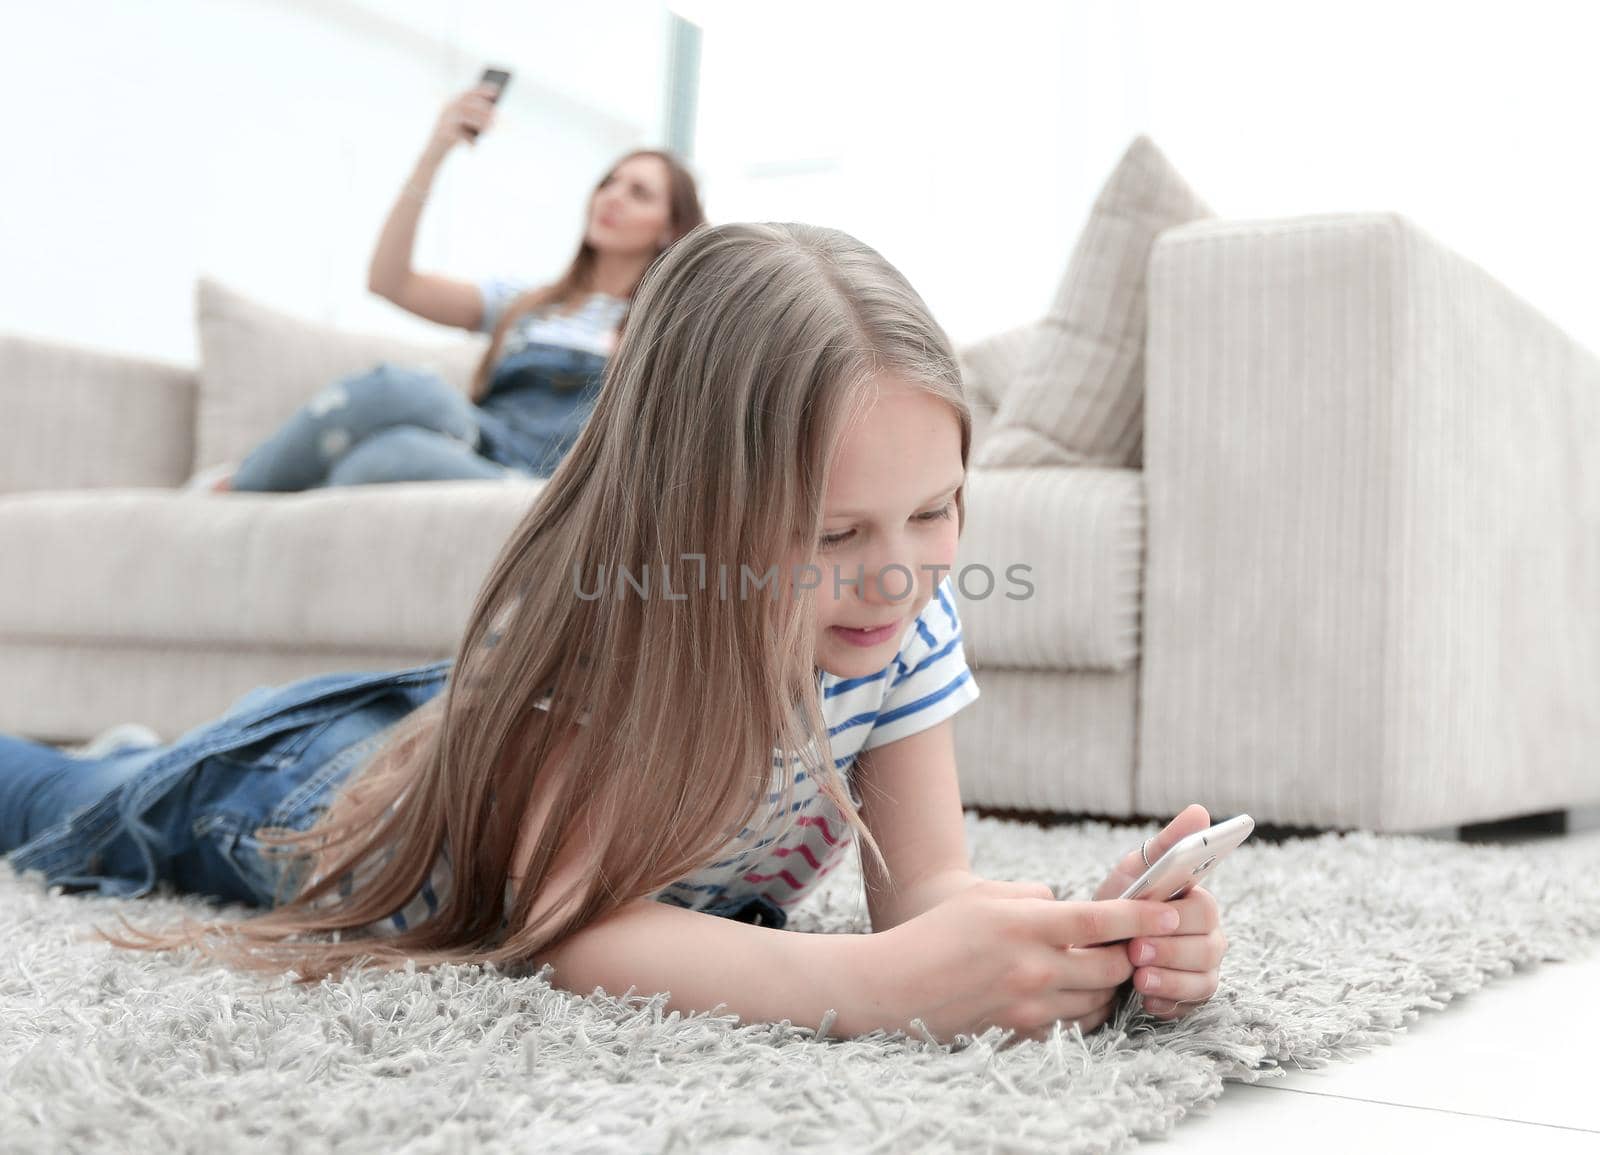 mom and her daughter using their smartphones in the new living room.photo with copy space